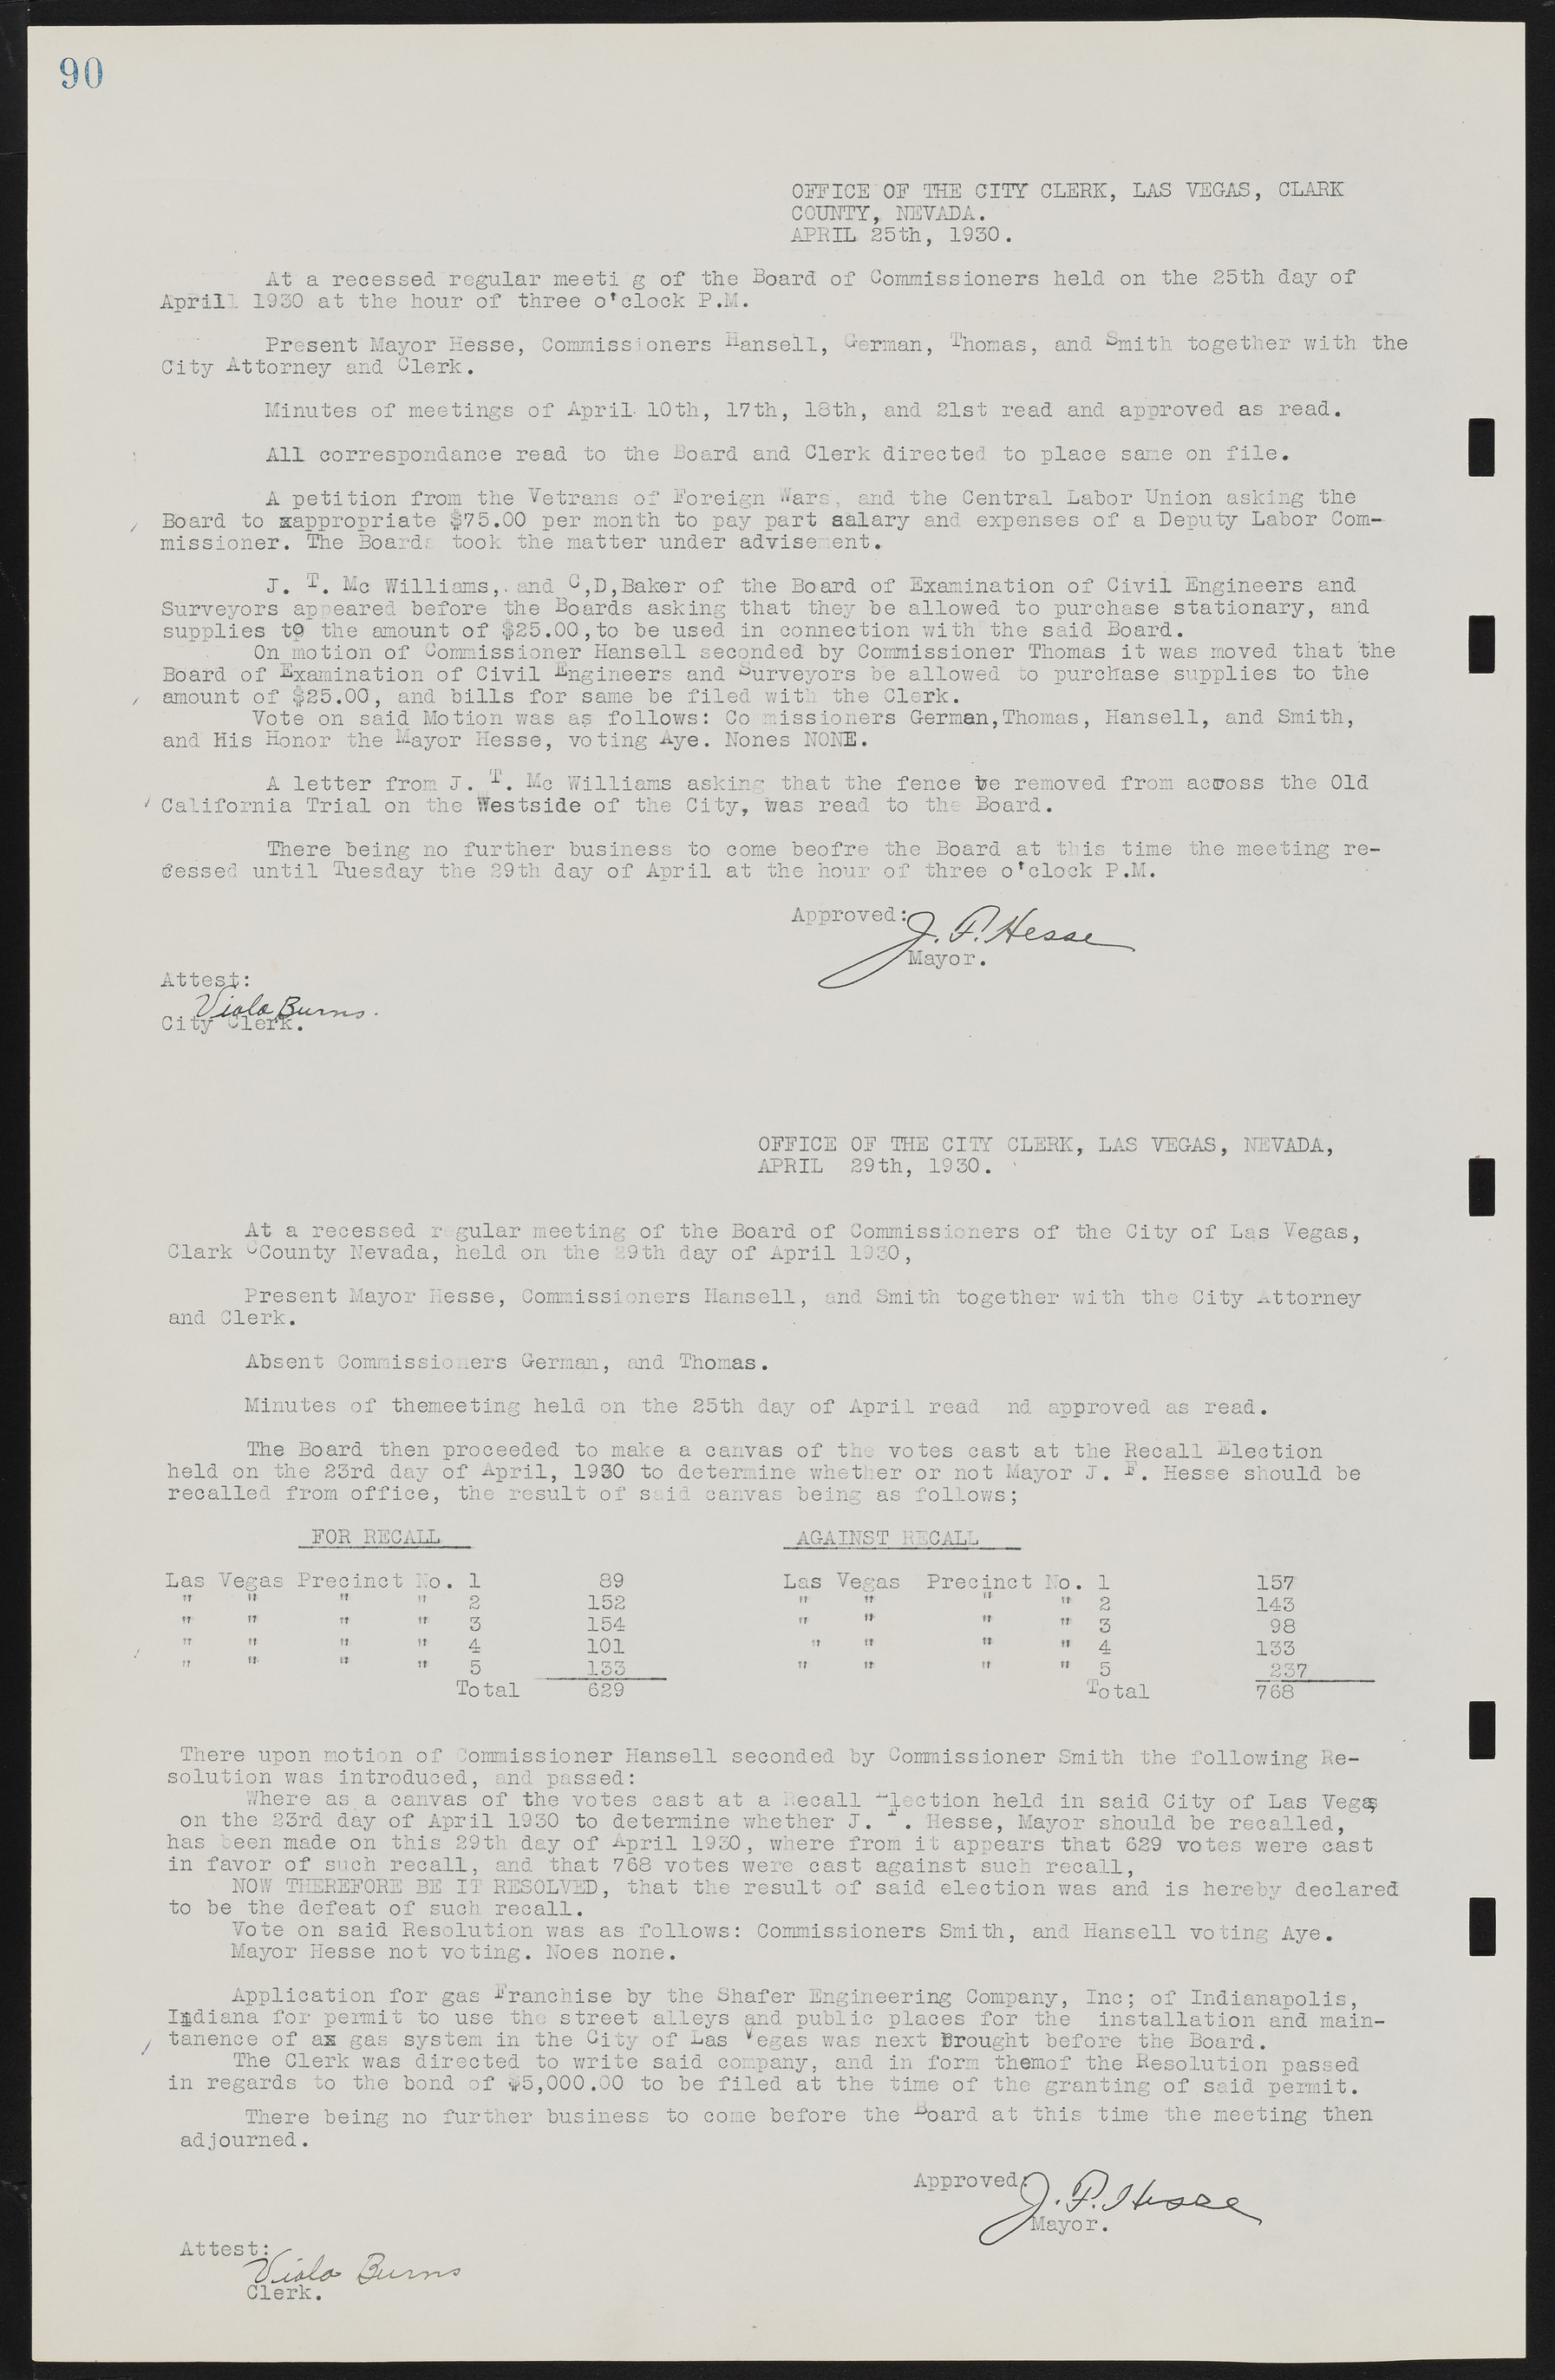 Las Vegas City Commission Minutes, May 14, 1929 to February 11, 1937, lvc000003-96